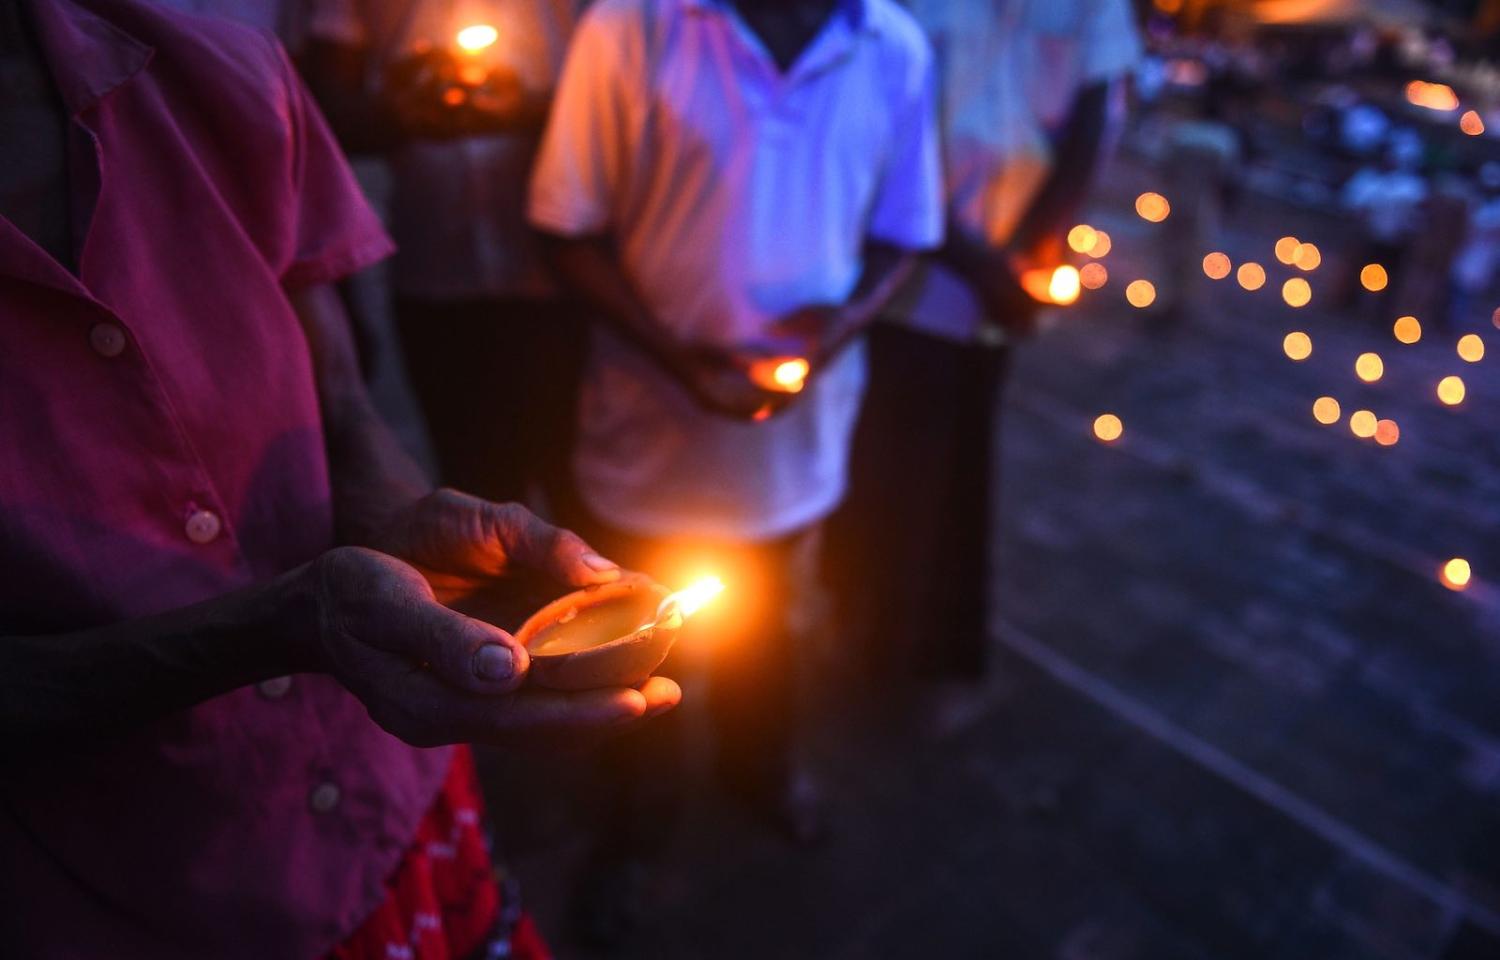 A remembrance ceremony in Colombo in June, two months after the Easter Sunday bombings that killed 258 people (Photo: Ishara S. Kodikara via Getty)